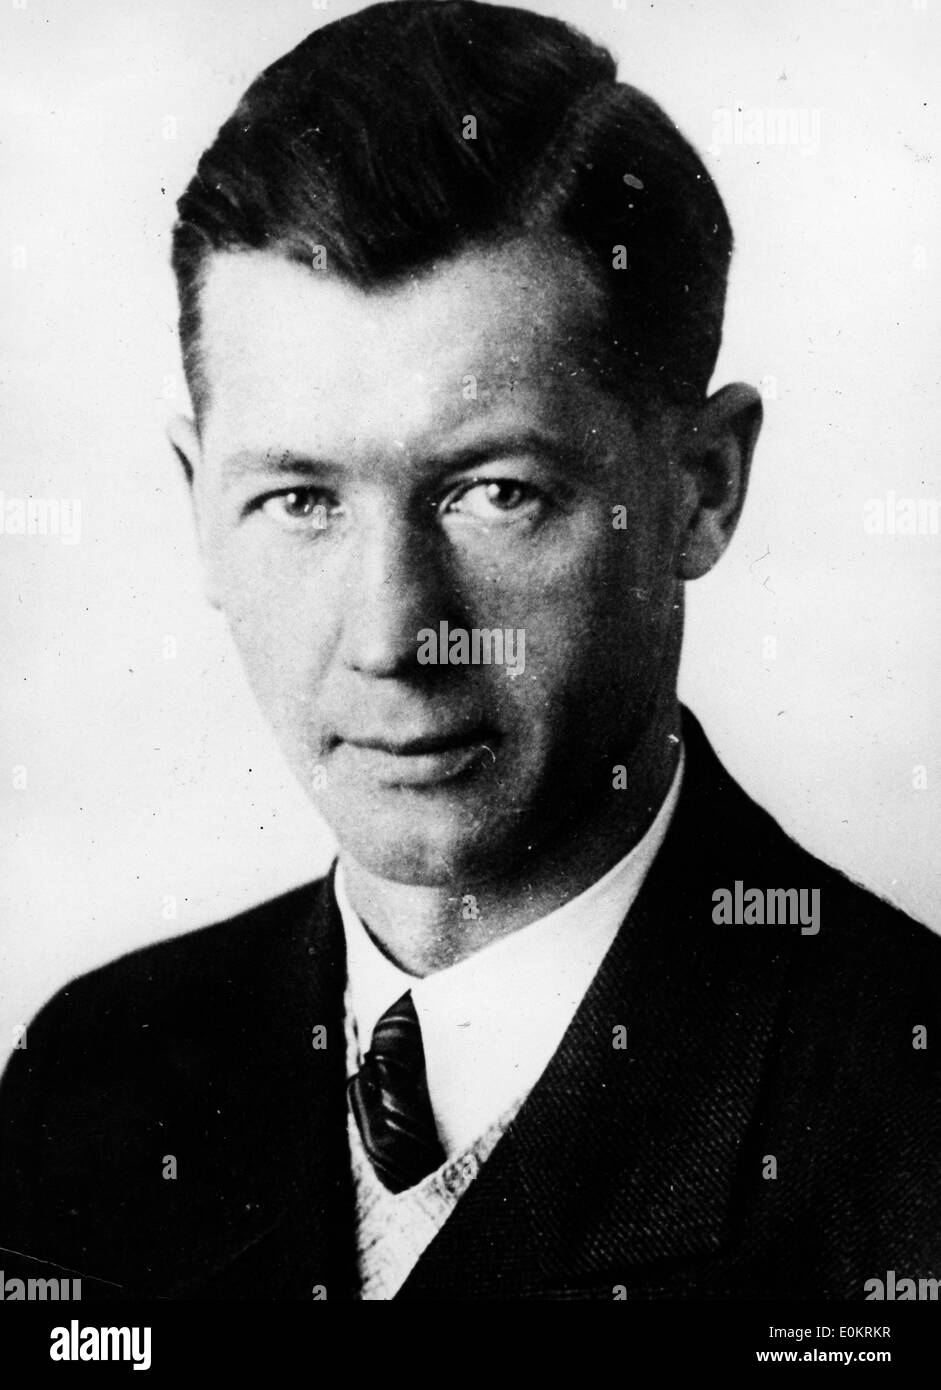 Jan. 01, 1940 - Munich, Germany - File Photo: circa 1940s. Nazi leader JOSEF TERBOVEN, the Reichskommissar of Norway, during Second World War. Stock Photo